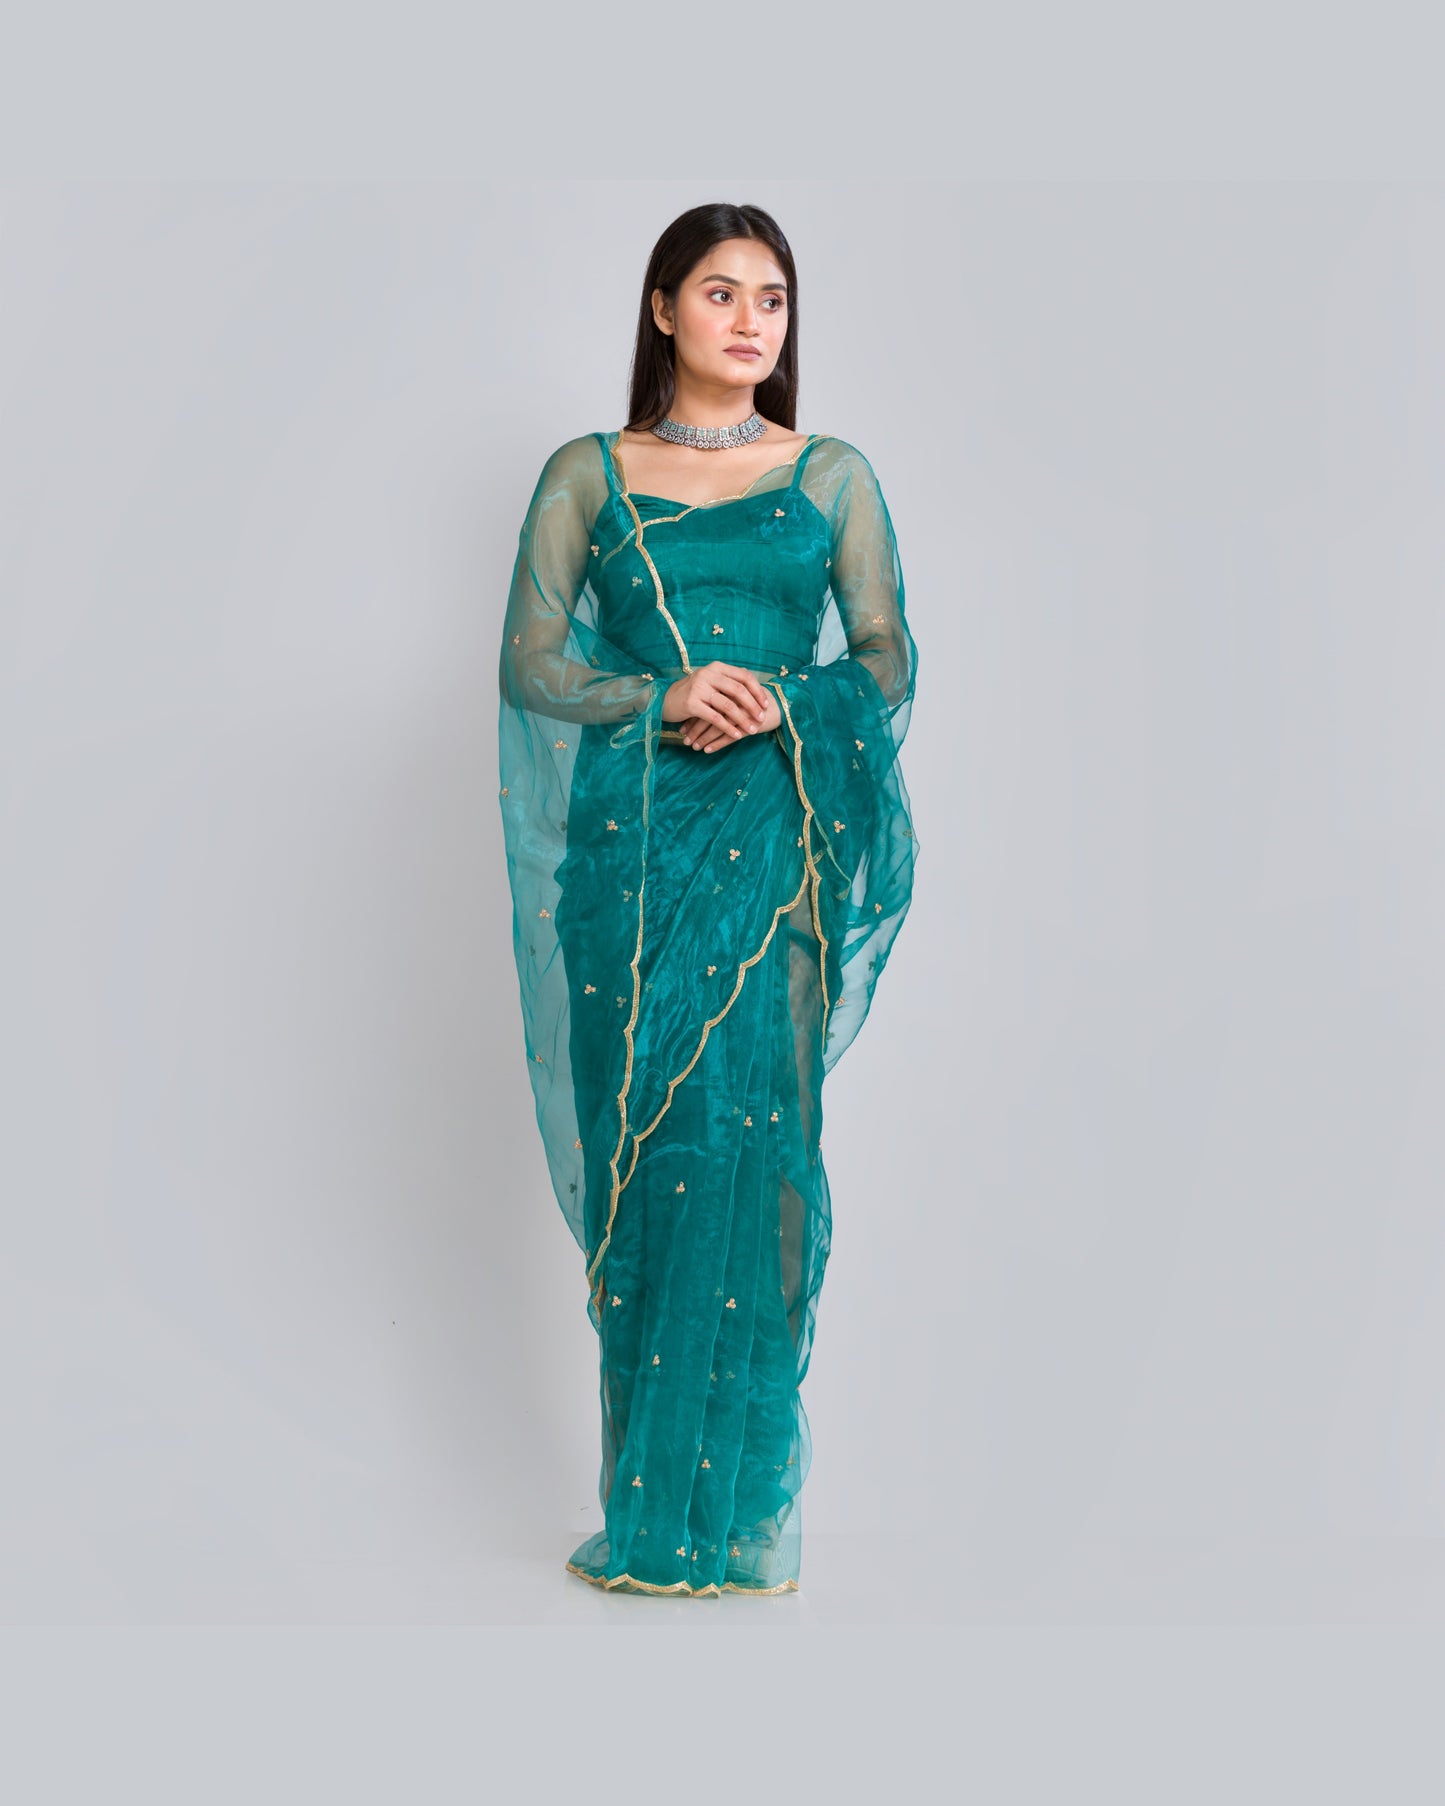 Teal Blue Glass Tissue Saree With Handembroidered Scalloping - kreationbykj